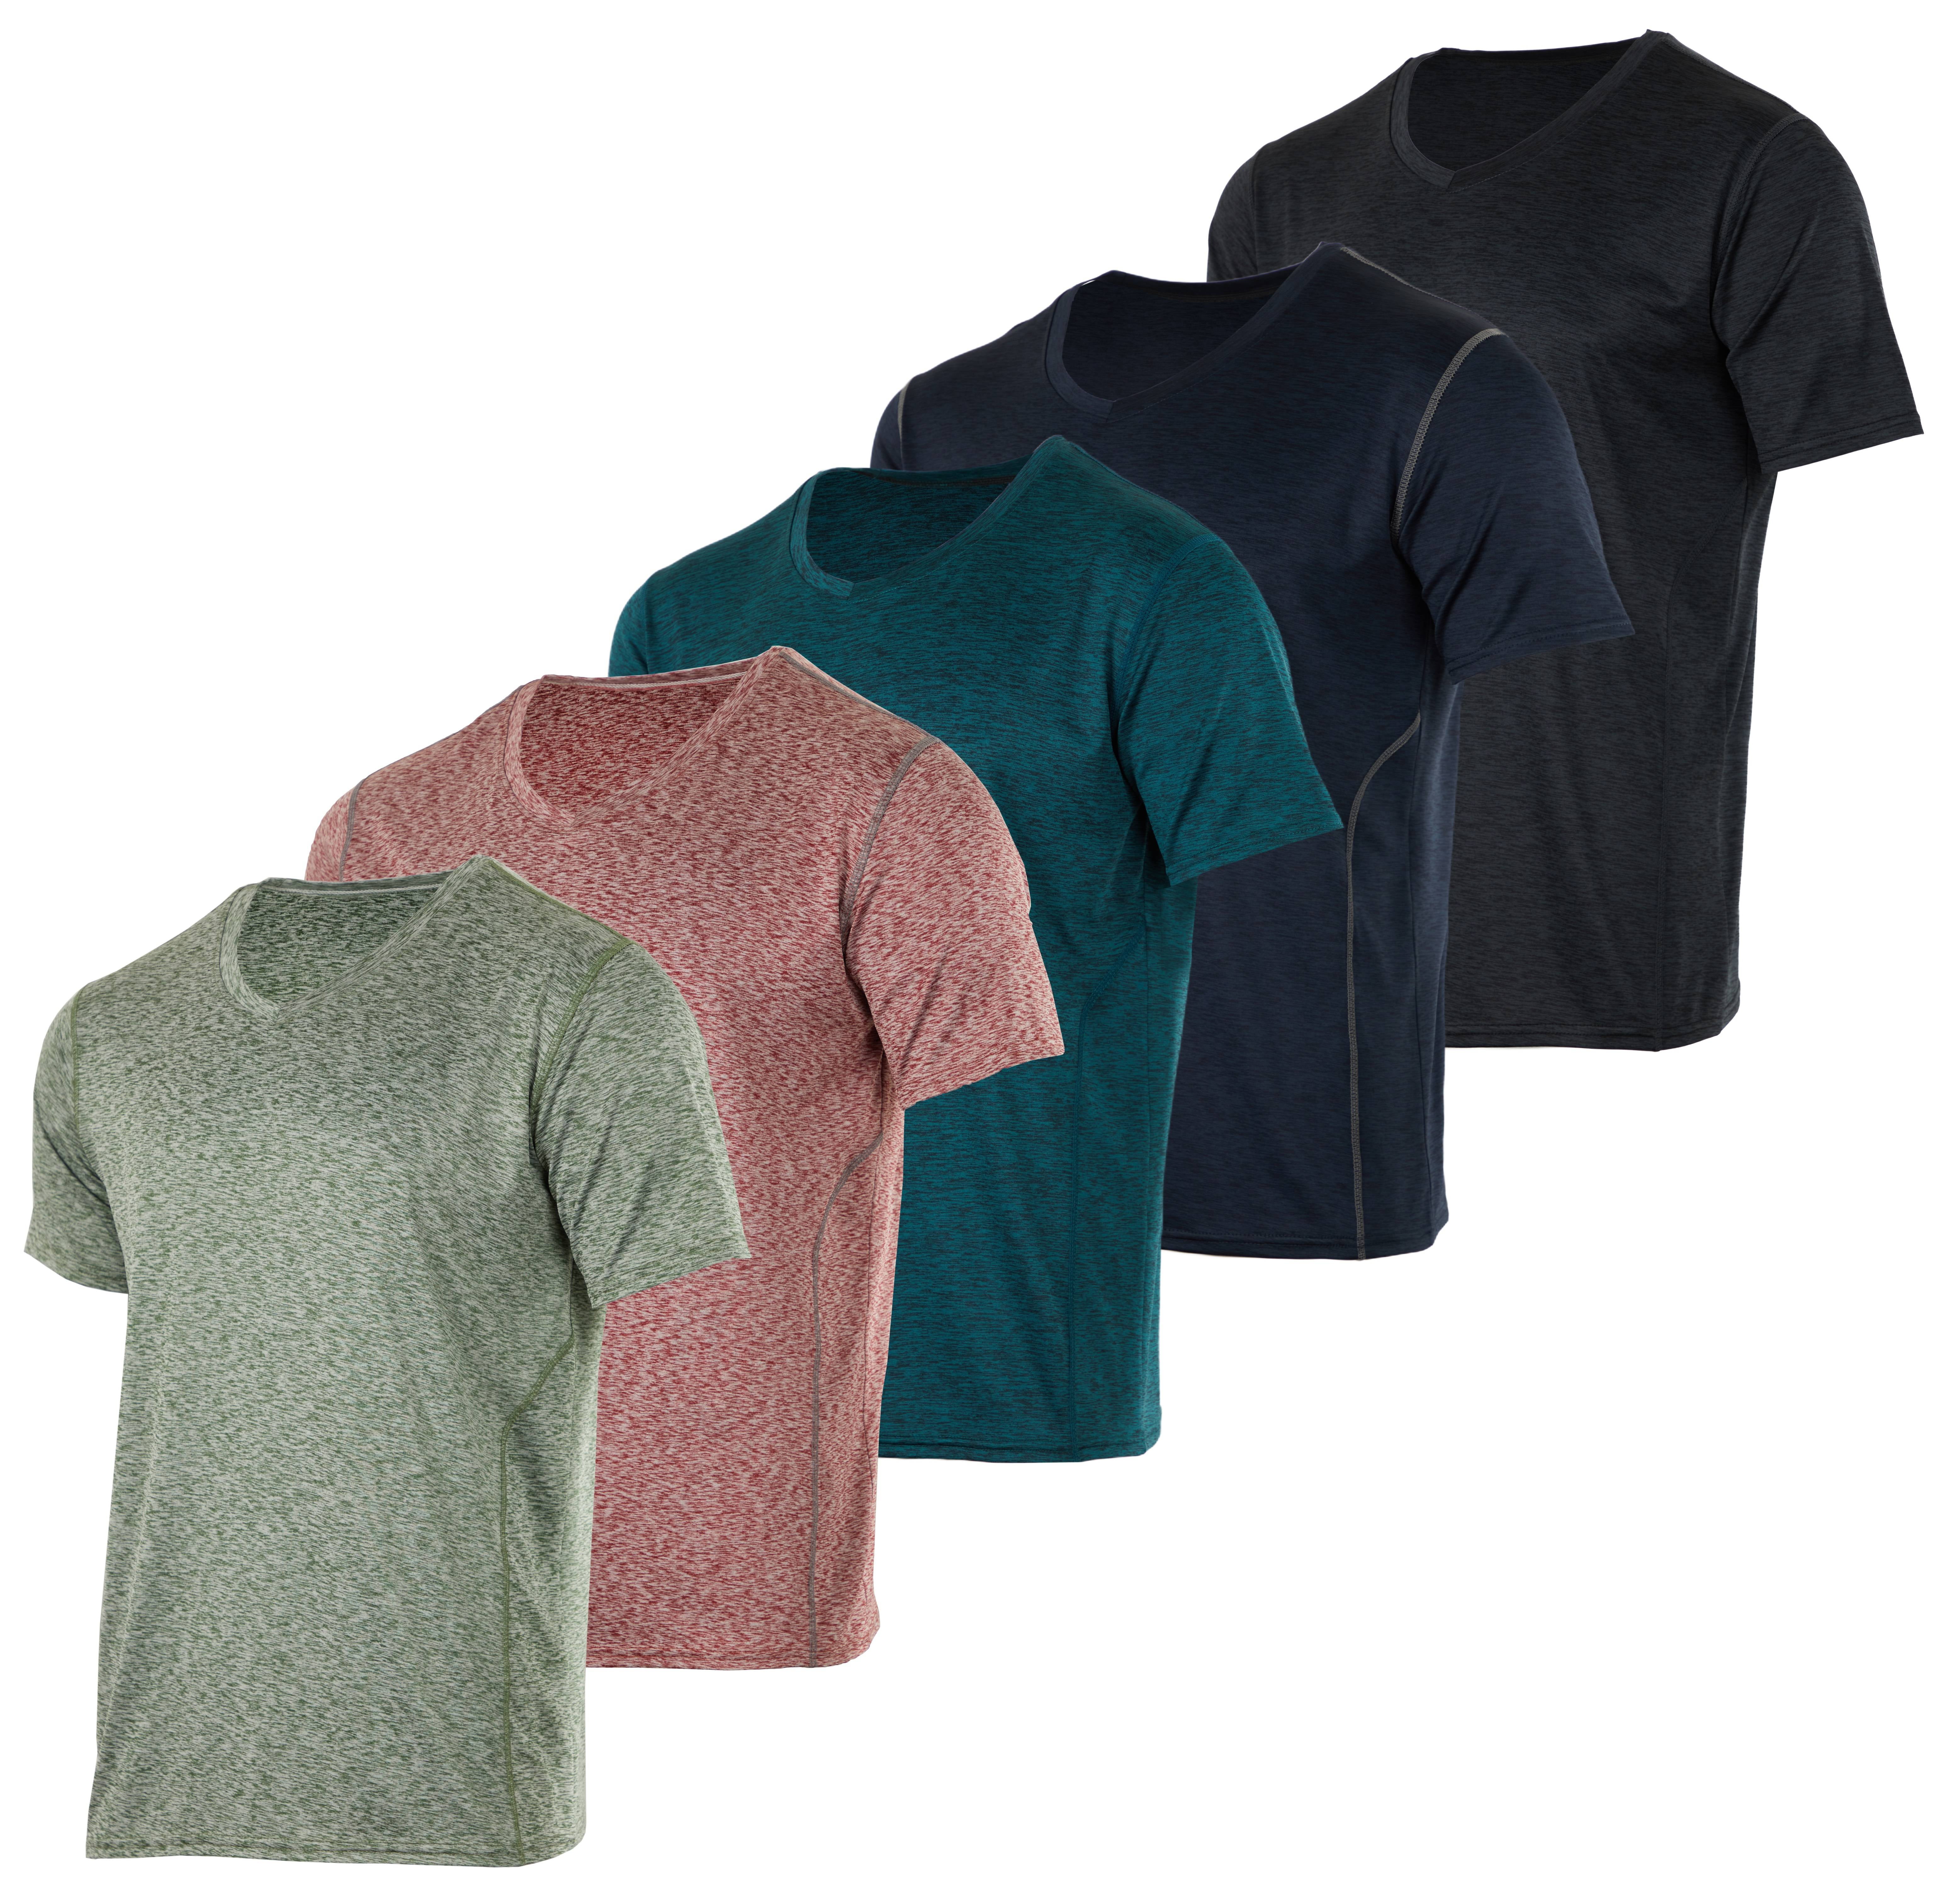 Real Essentials 5 Pack: Men\'s V-Neck Dry-Fit Moisture Wicking Active  Athletic Tech Performance T-Shirt